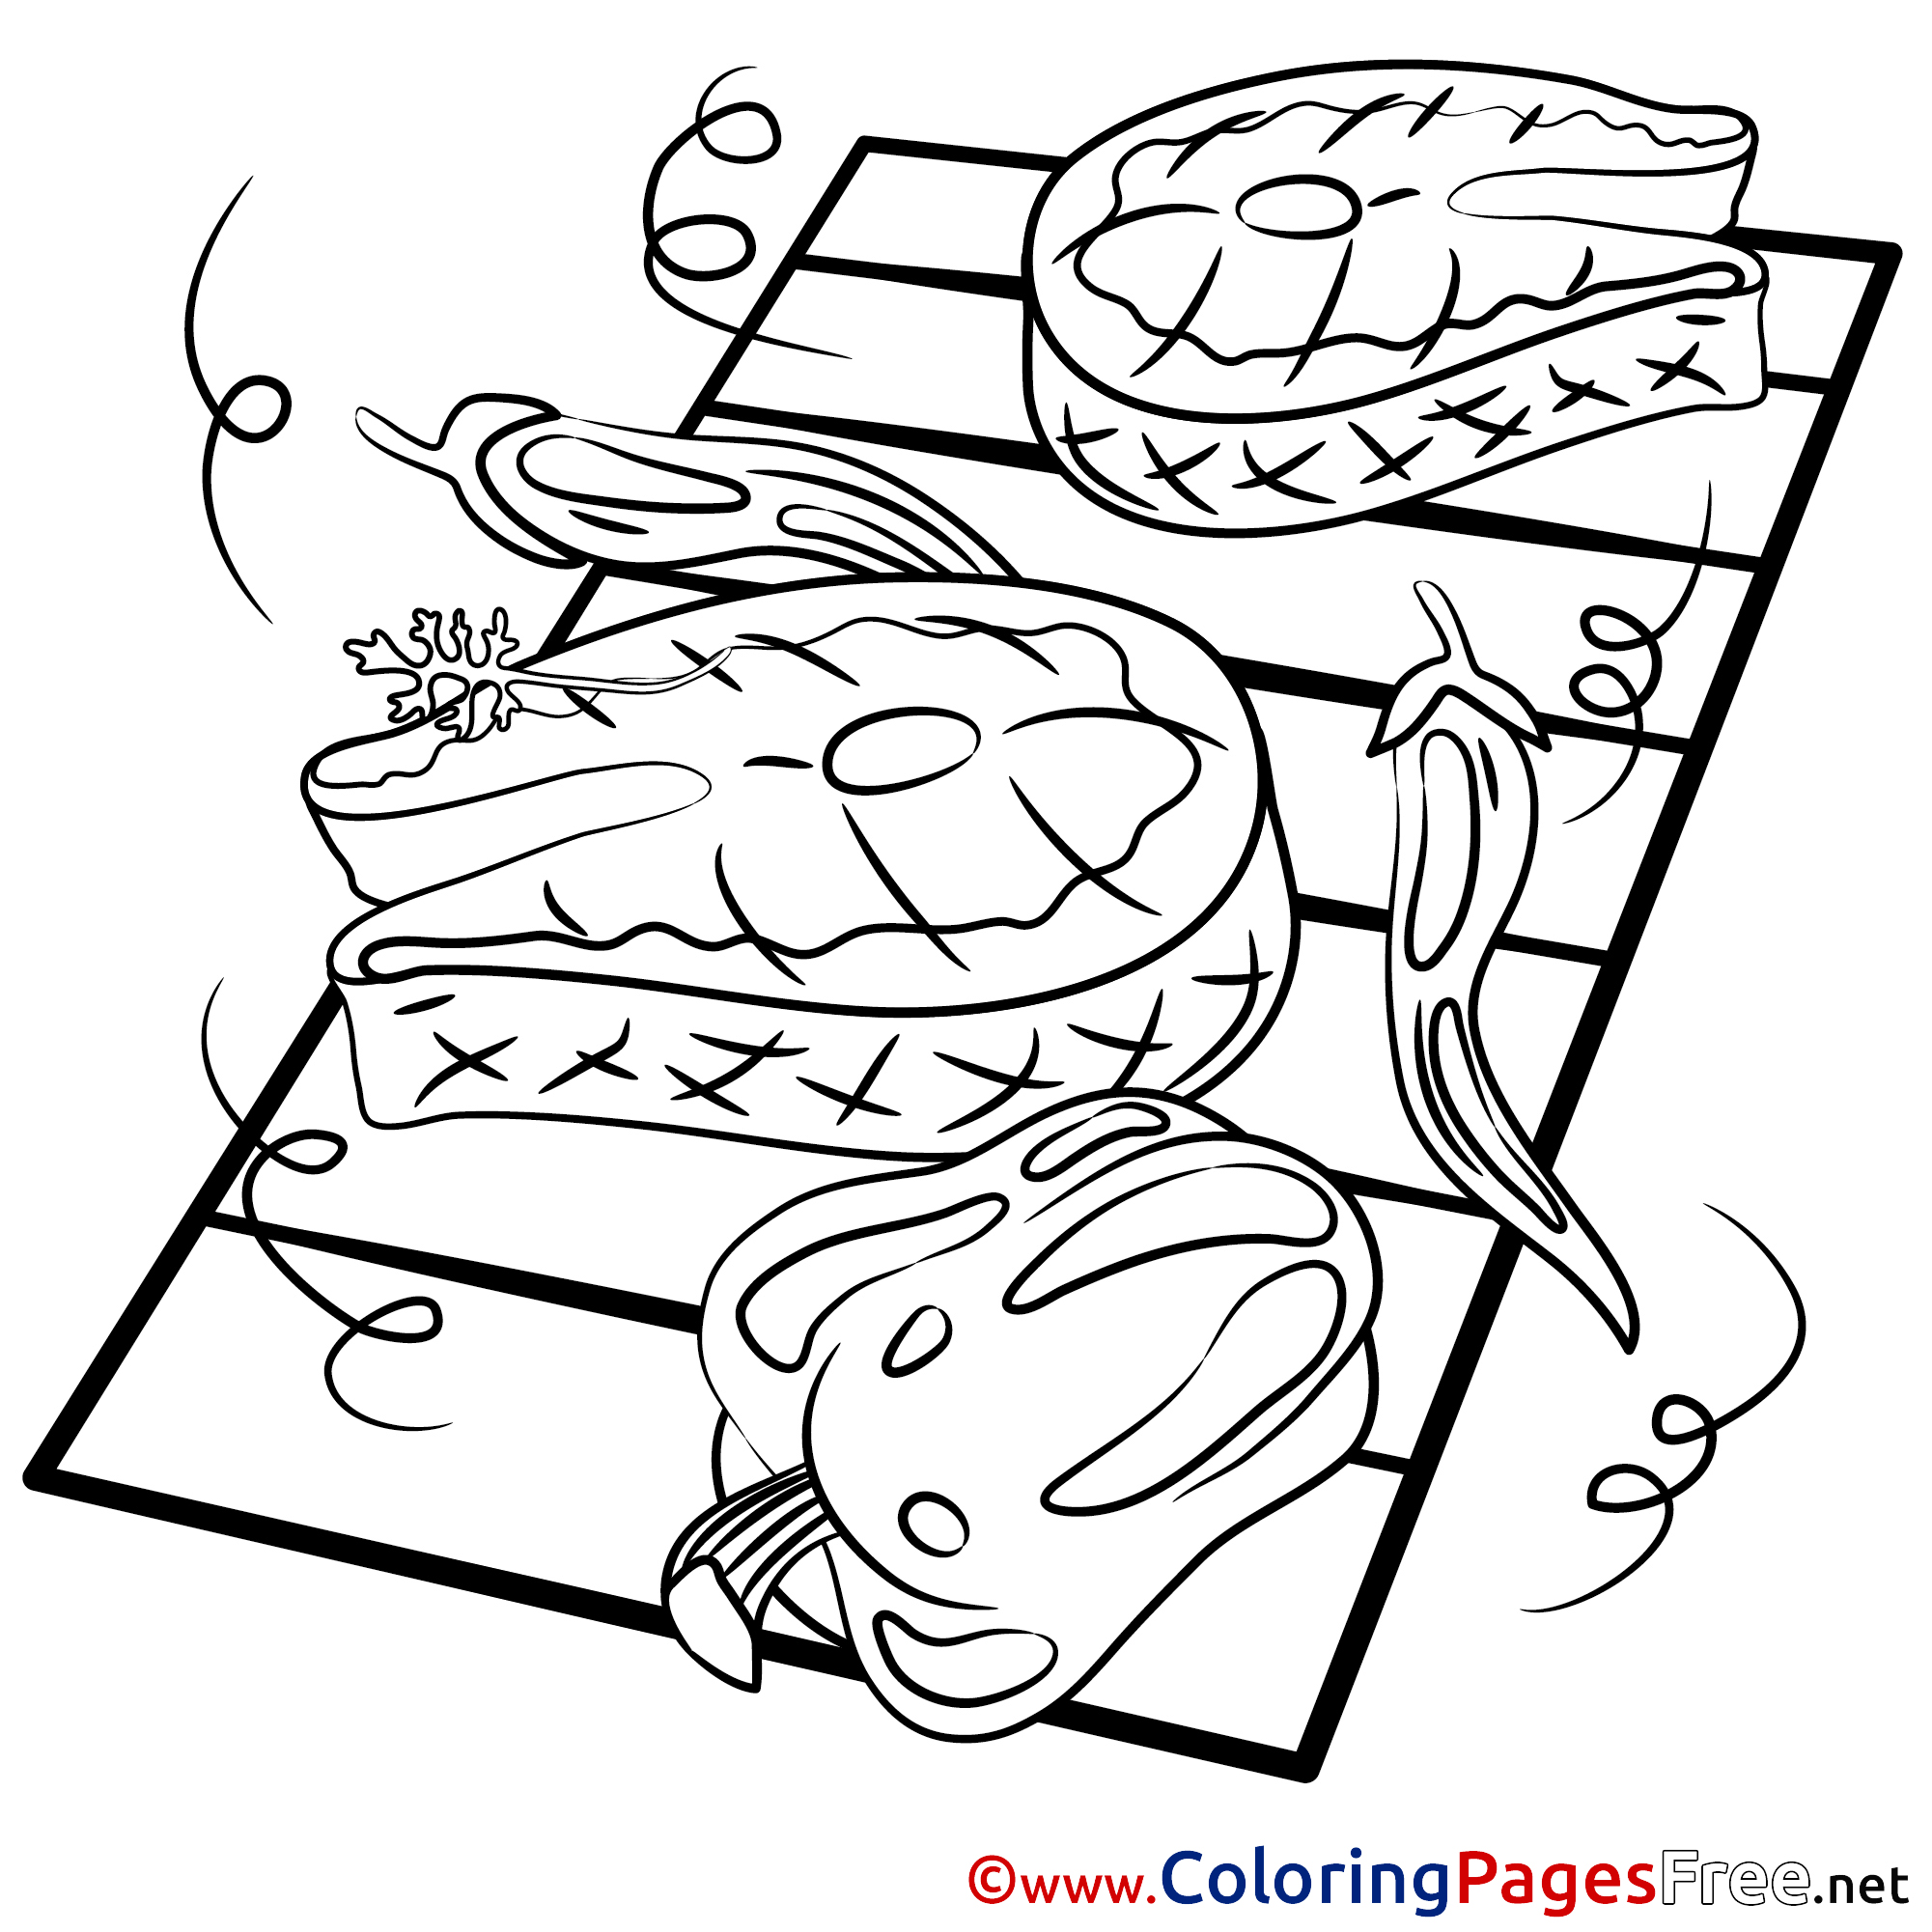 Download Top 100 Meat Coloring Pages - cool wallpaper